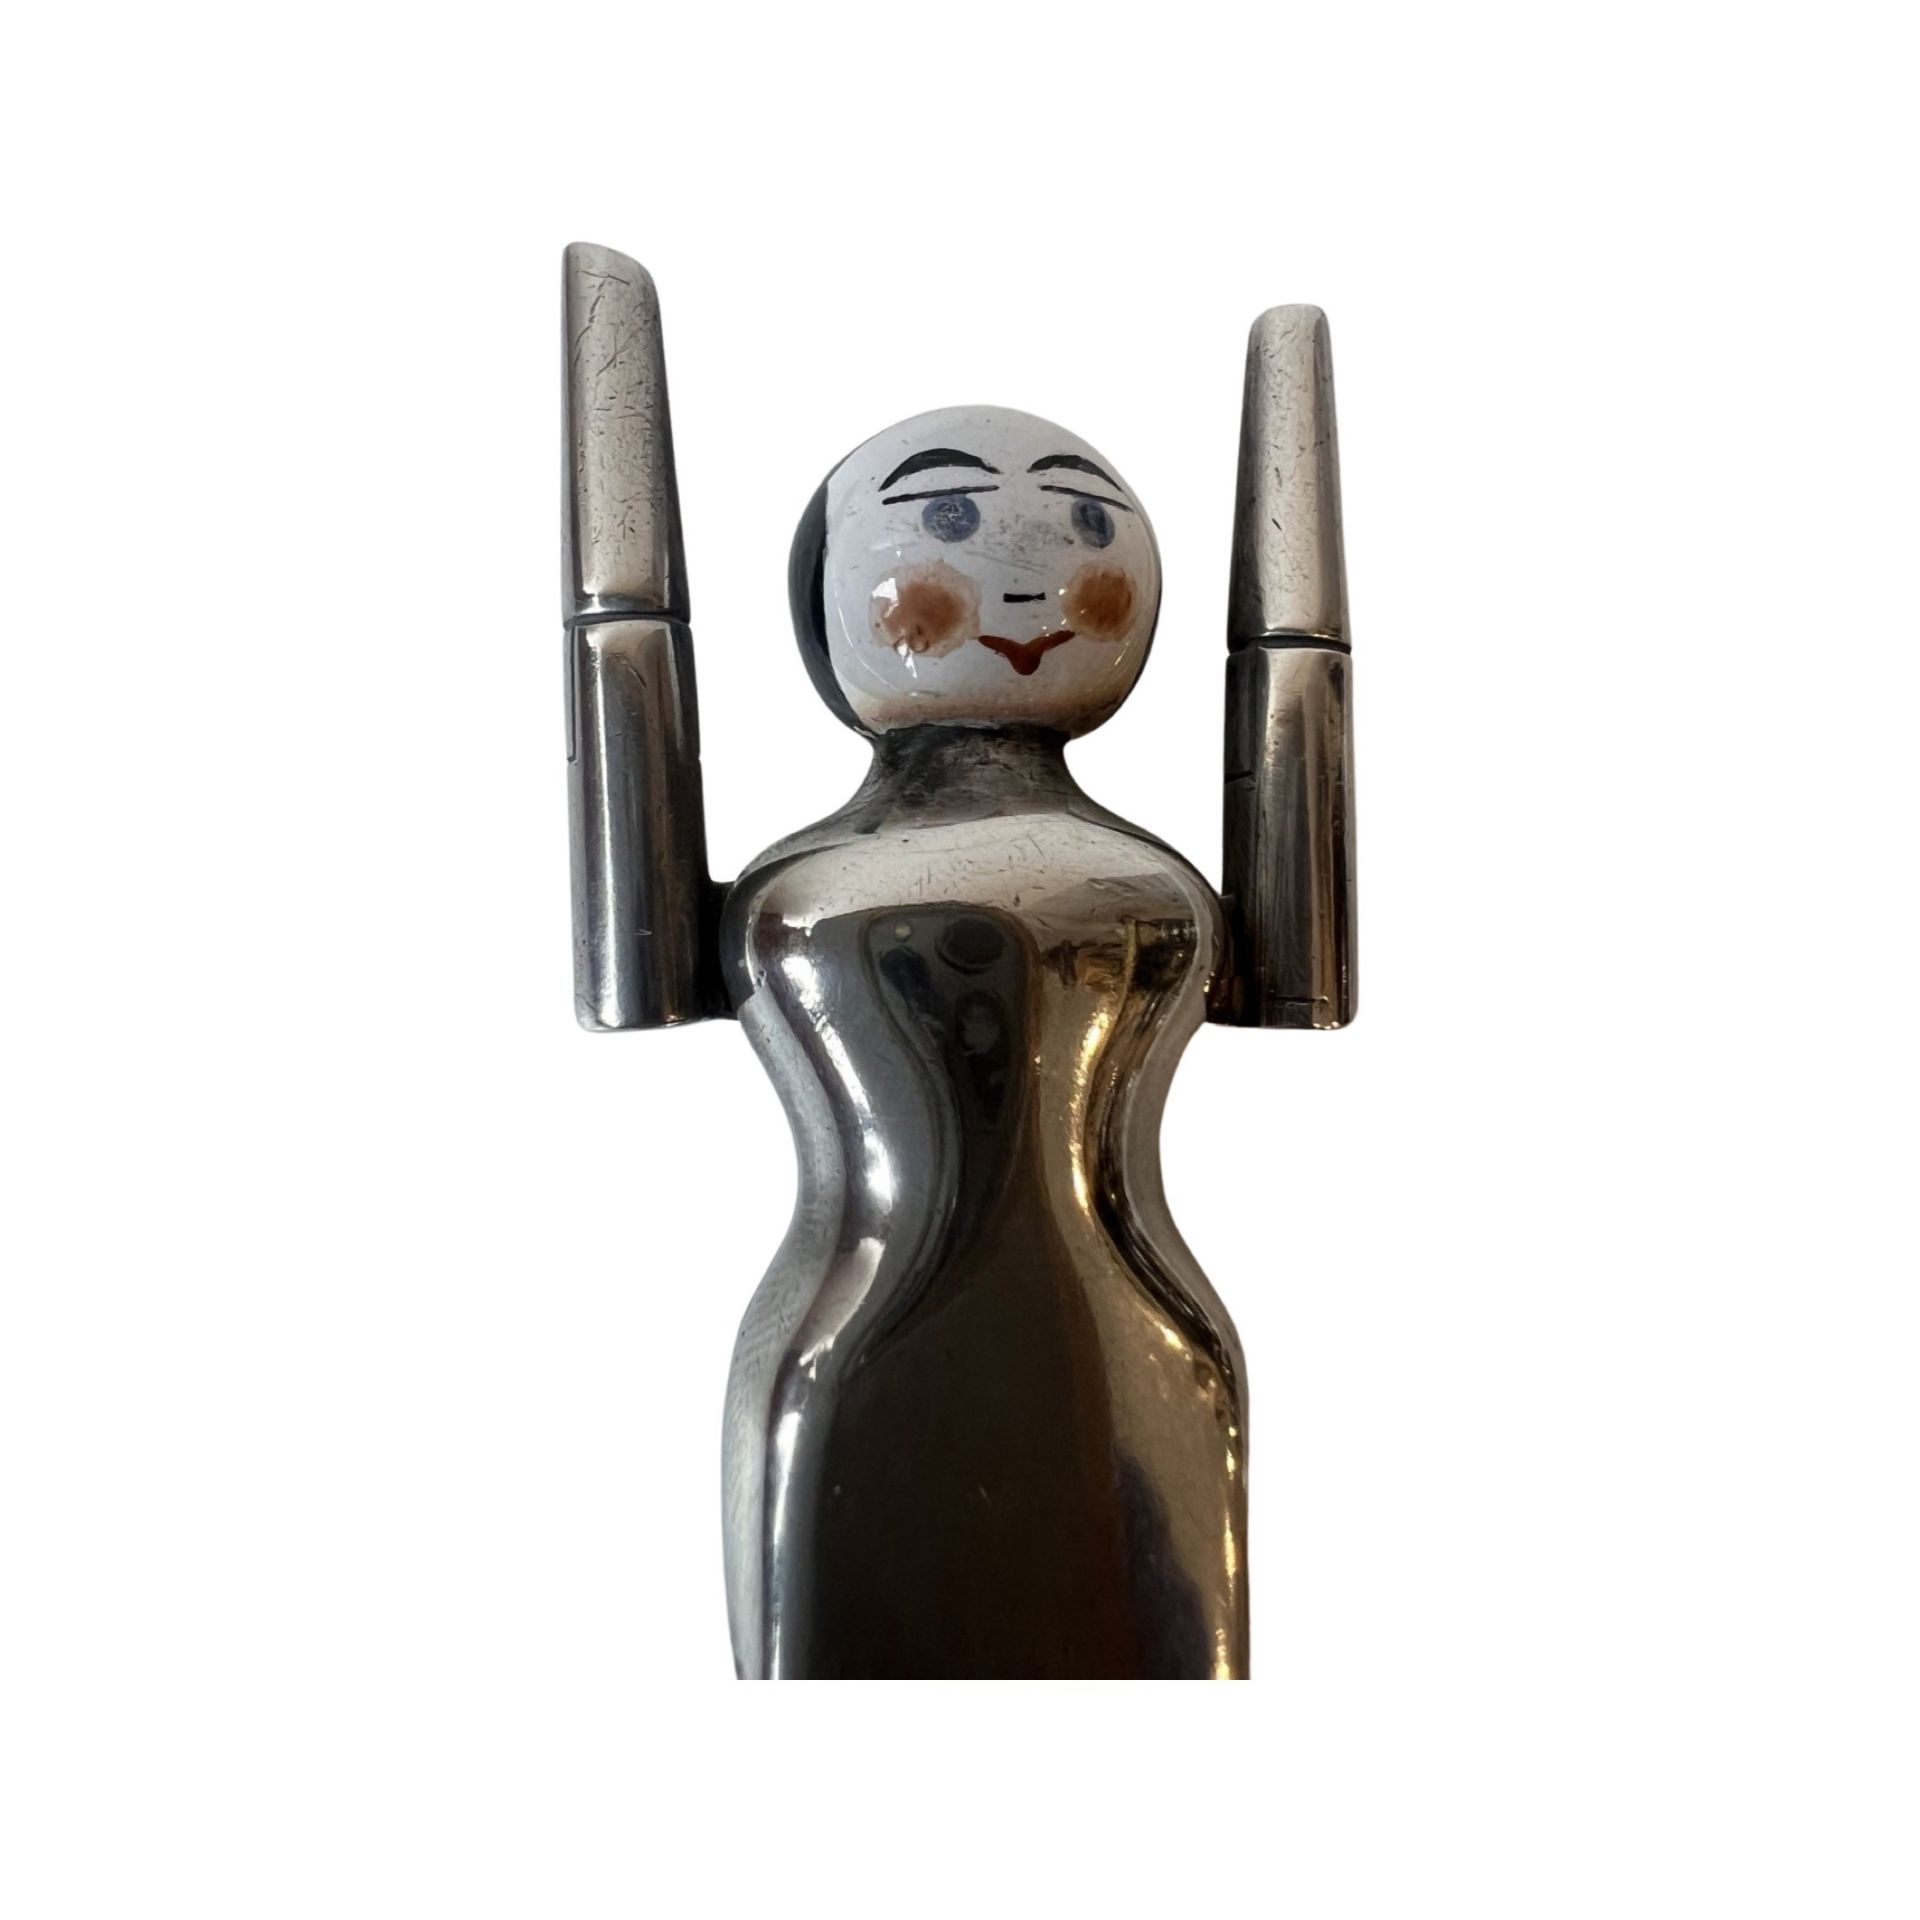 A RARE PAIR OF EARLY 20TH CENTURY SILVER AND ENAMEL 'DUTCH DOLL' SUGAR TONG, LONDON, 1910 - Image 4 of 4